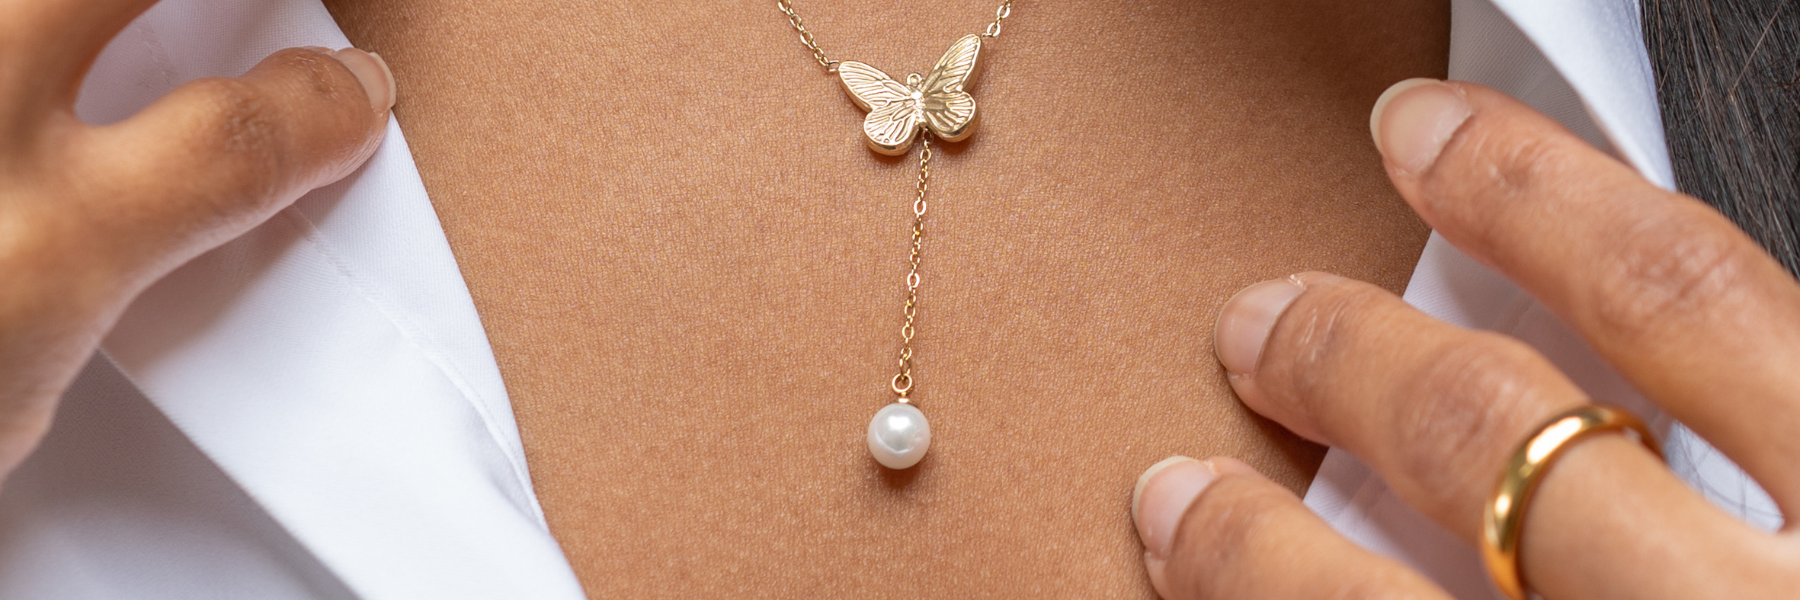 harma gold plated butterfly necklace